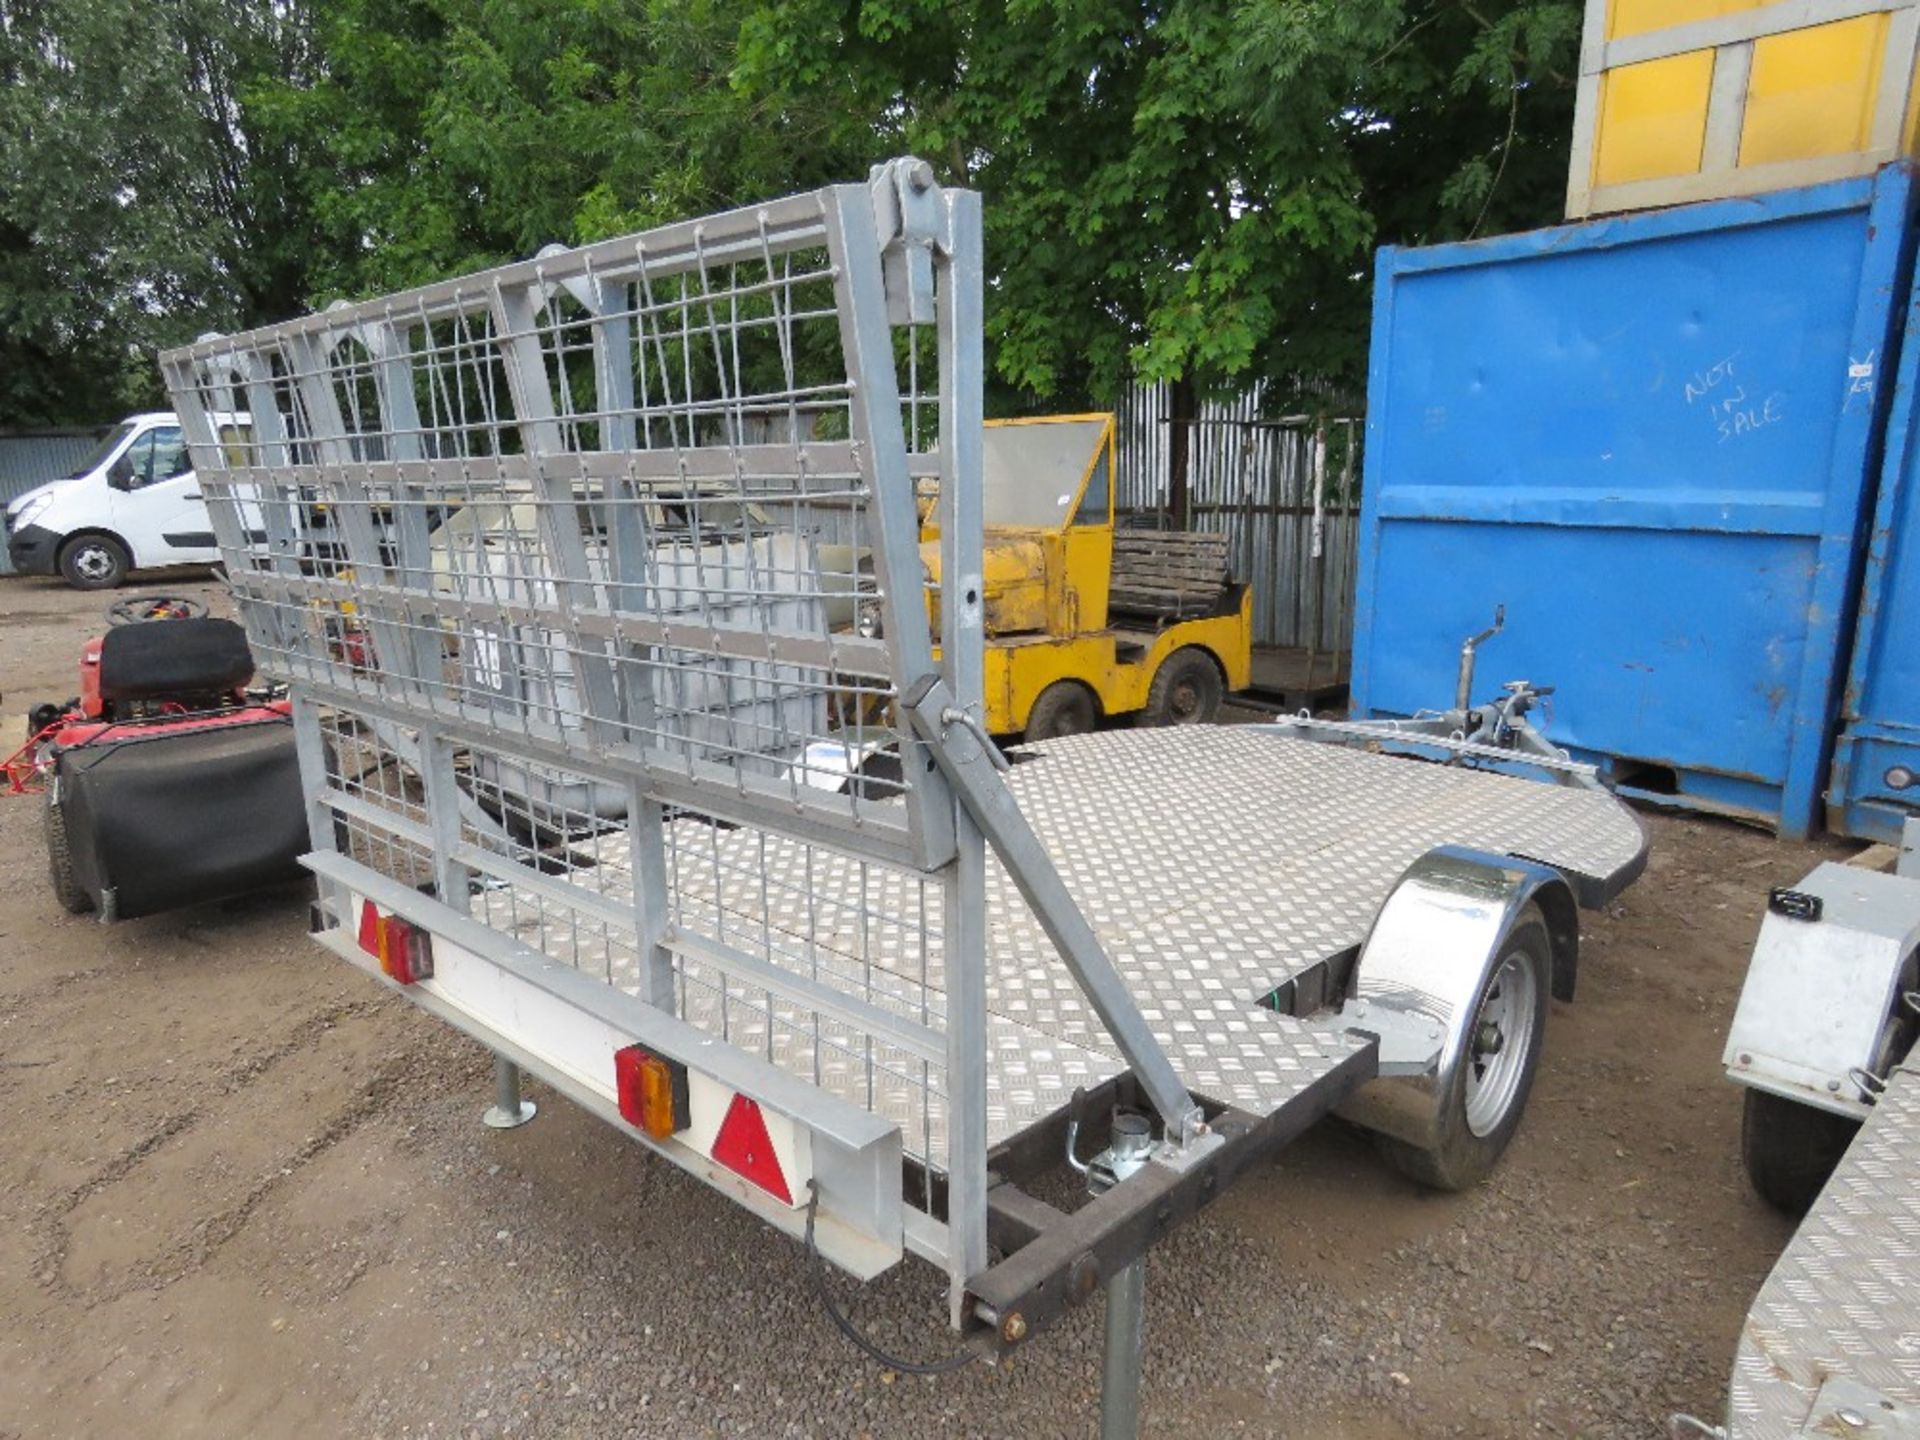 SINGLE AXLED QUAD BIKE / FLAT TRAILER 1.8M WIDE X 2.4M LENGTH BED APPROX. SOURCED FROM LIQUIDATION. - Image 3 of 6